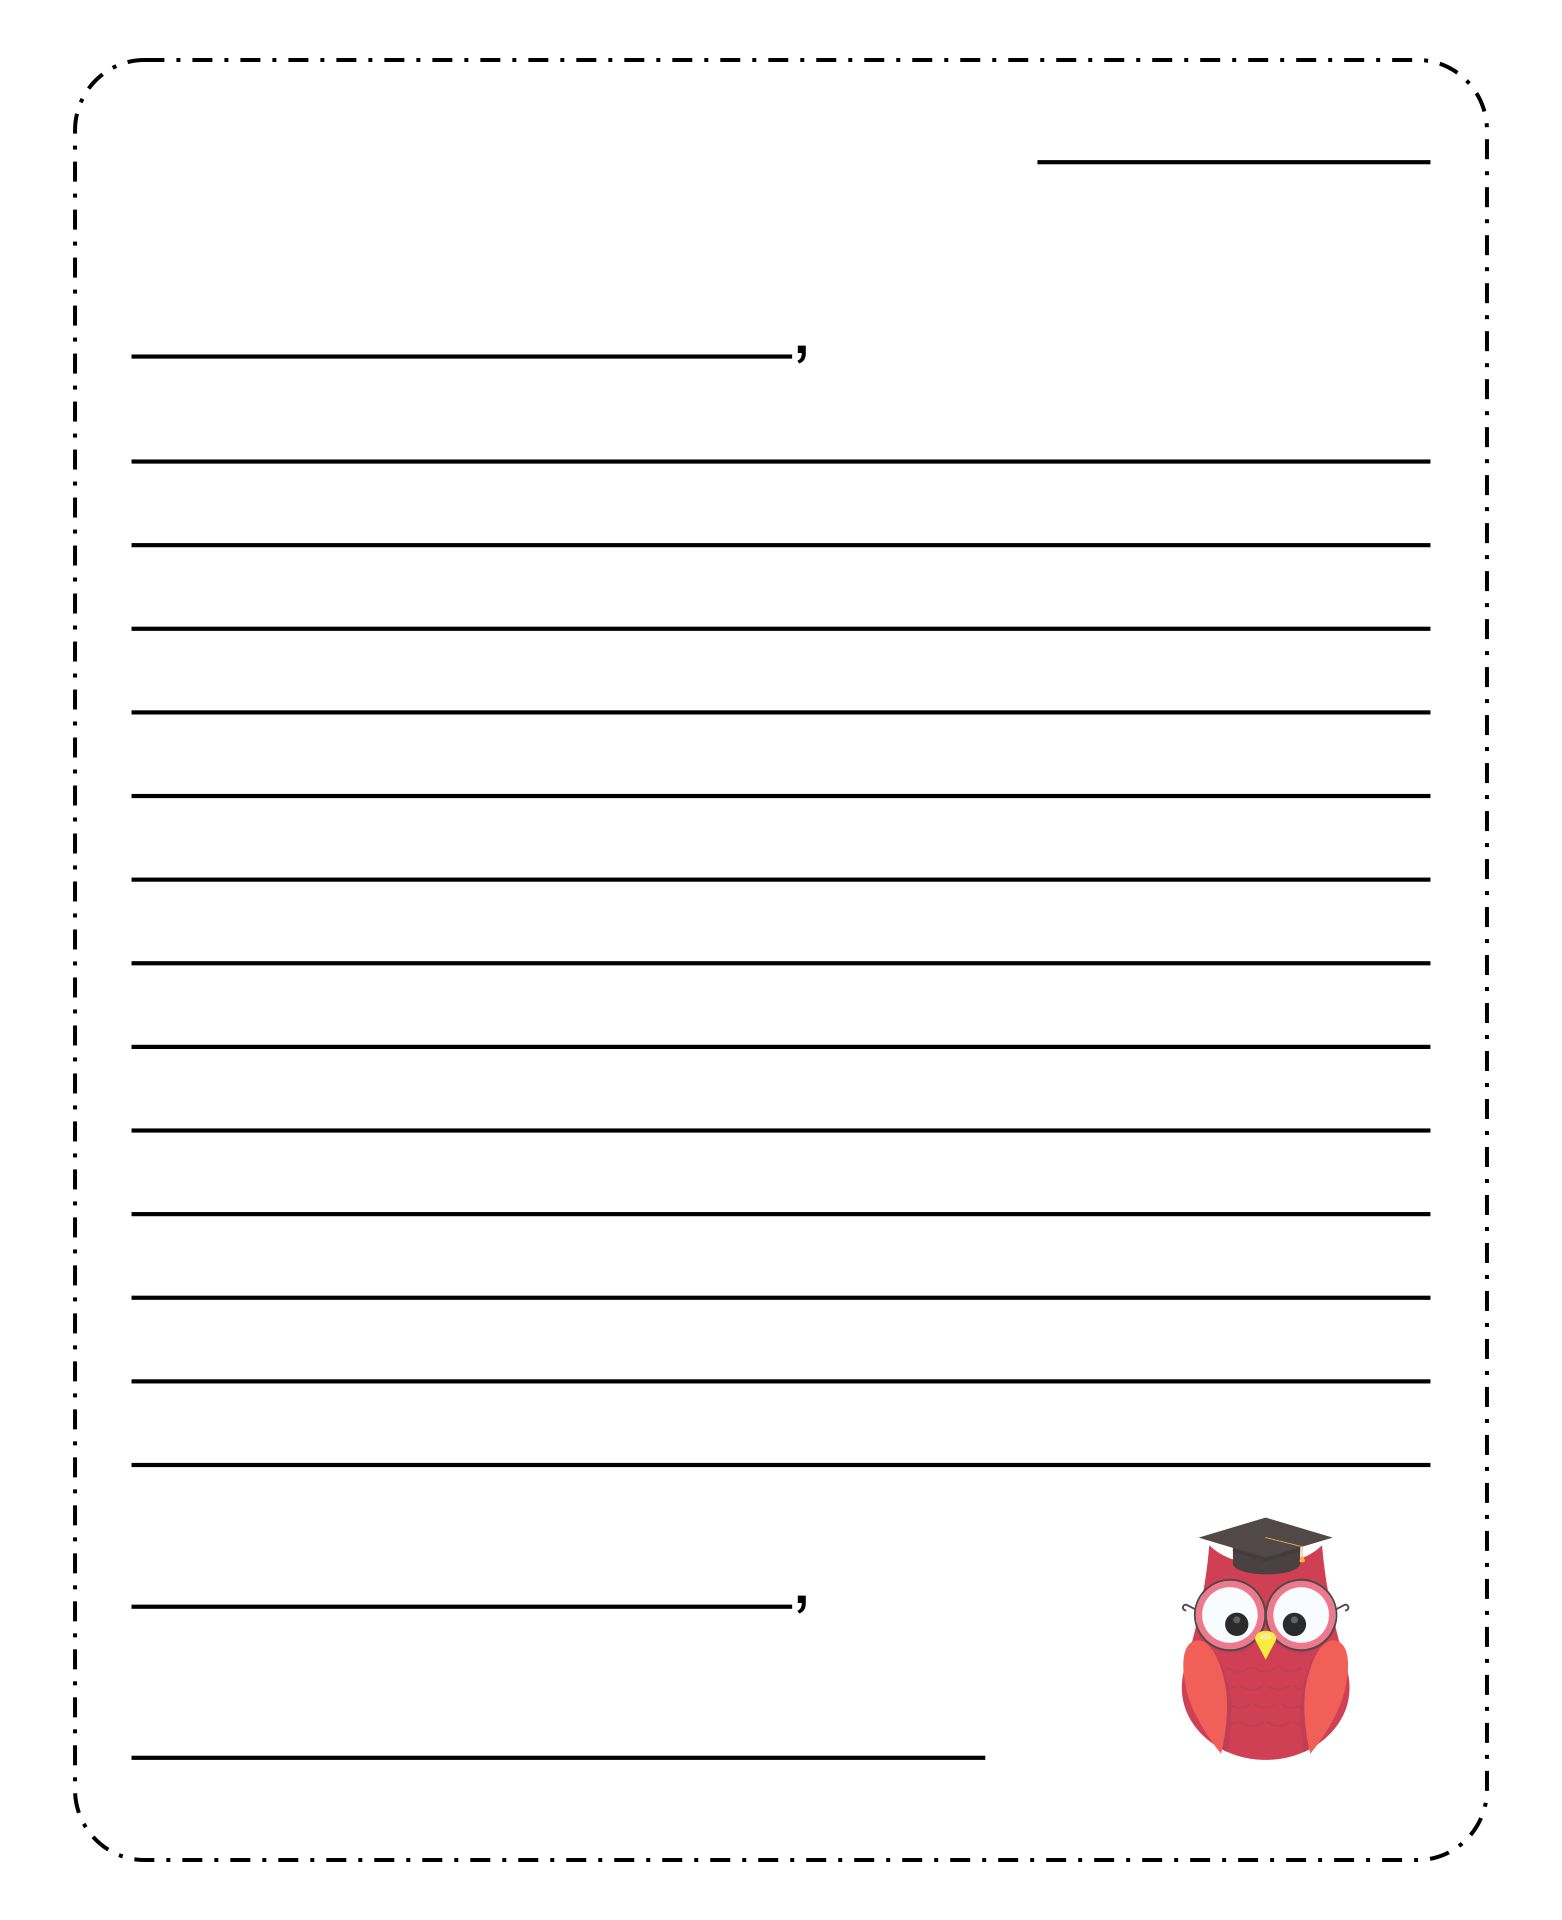 Friendly Letter Writing Paper  Friendly letter writing, Friendly